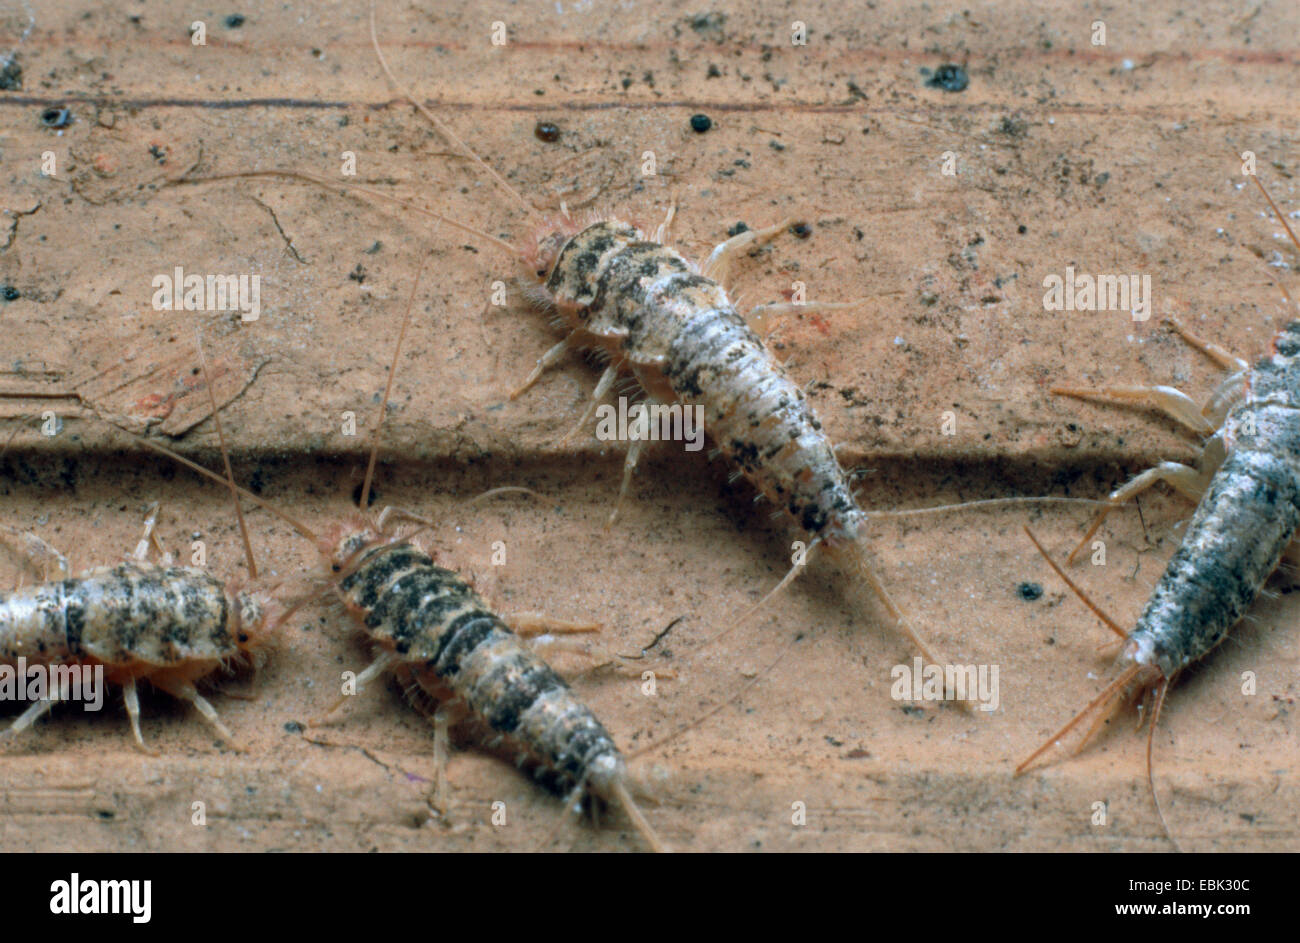 firebrat (Lepismodes inquilinus, Thermobia domestica), pest in bakeries Stock Photo